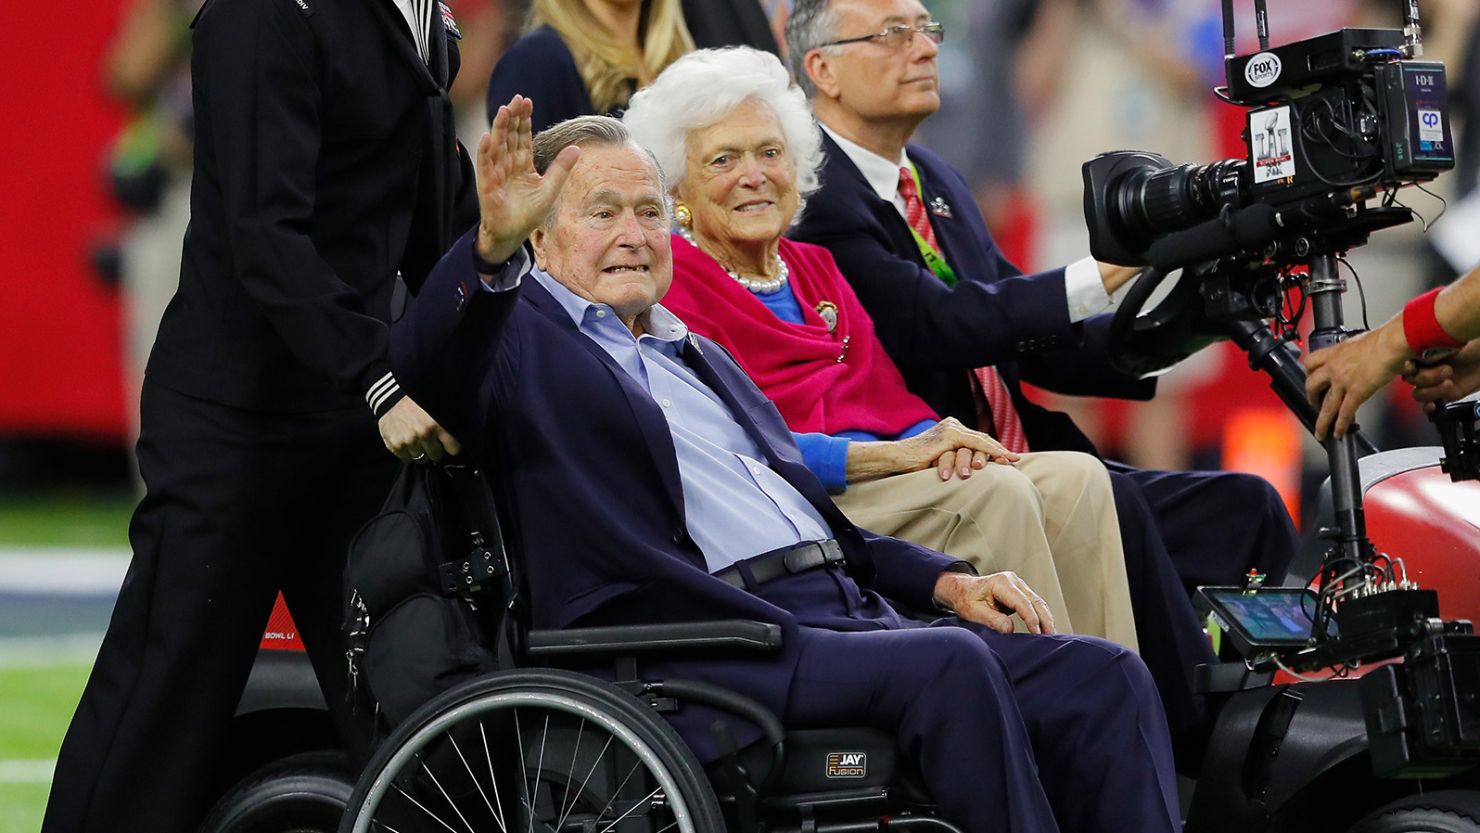 Former President George H.W. Bush and Barbara Bush arrive for the coin toss prior to Super Bowl 51 between the Atlanta Falcons and the New England Patriots at NRG Stadium on February 5, 2017, in Houston. 